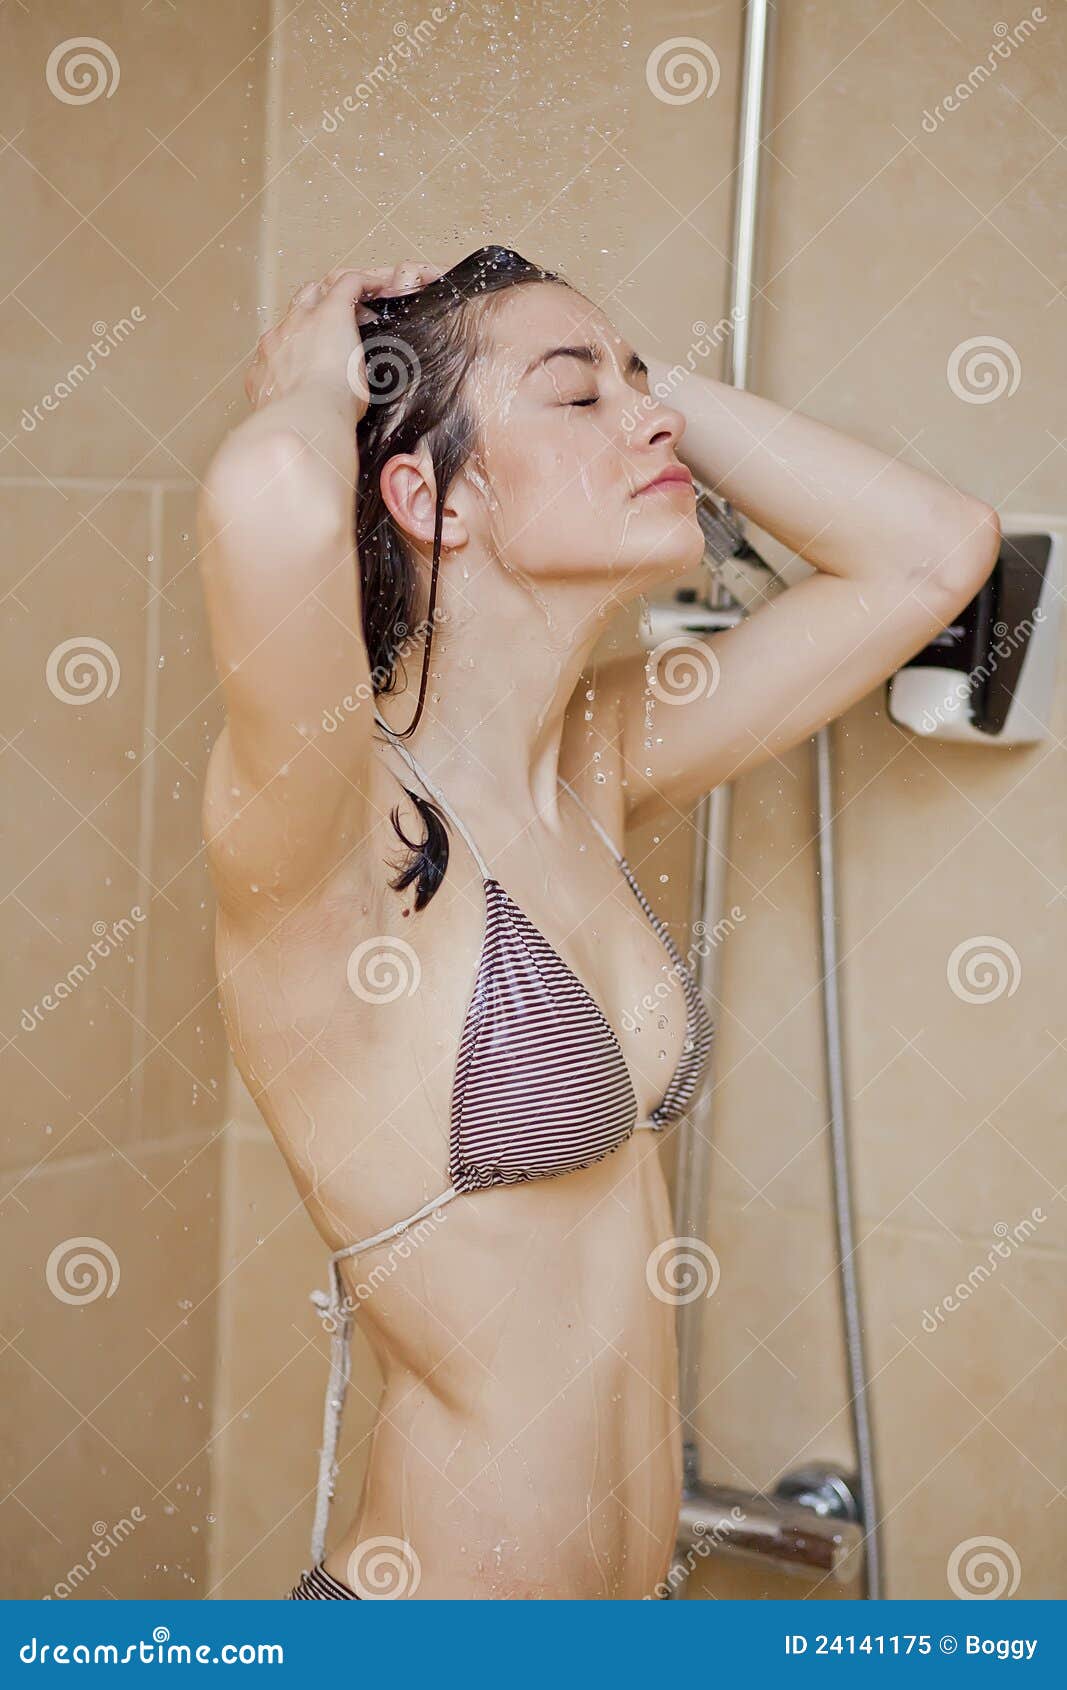 barbara addis recommends pictures of girls in the shower pic